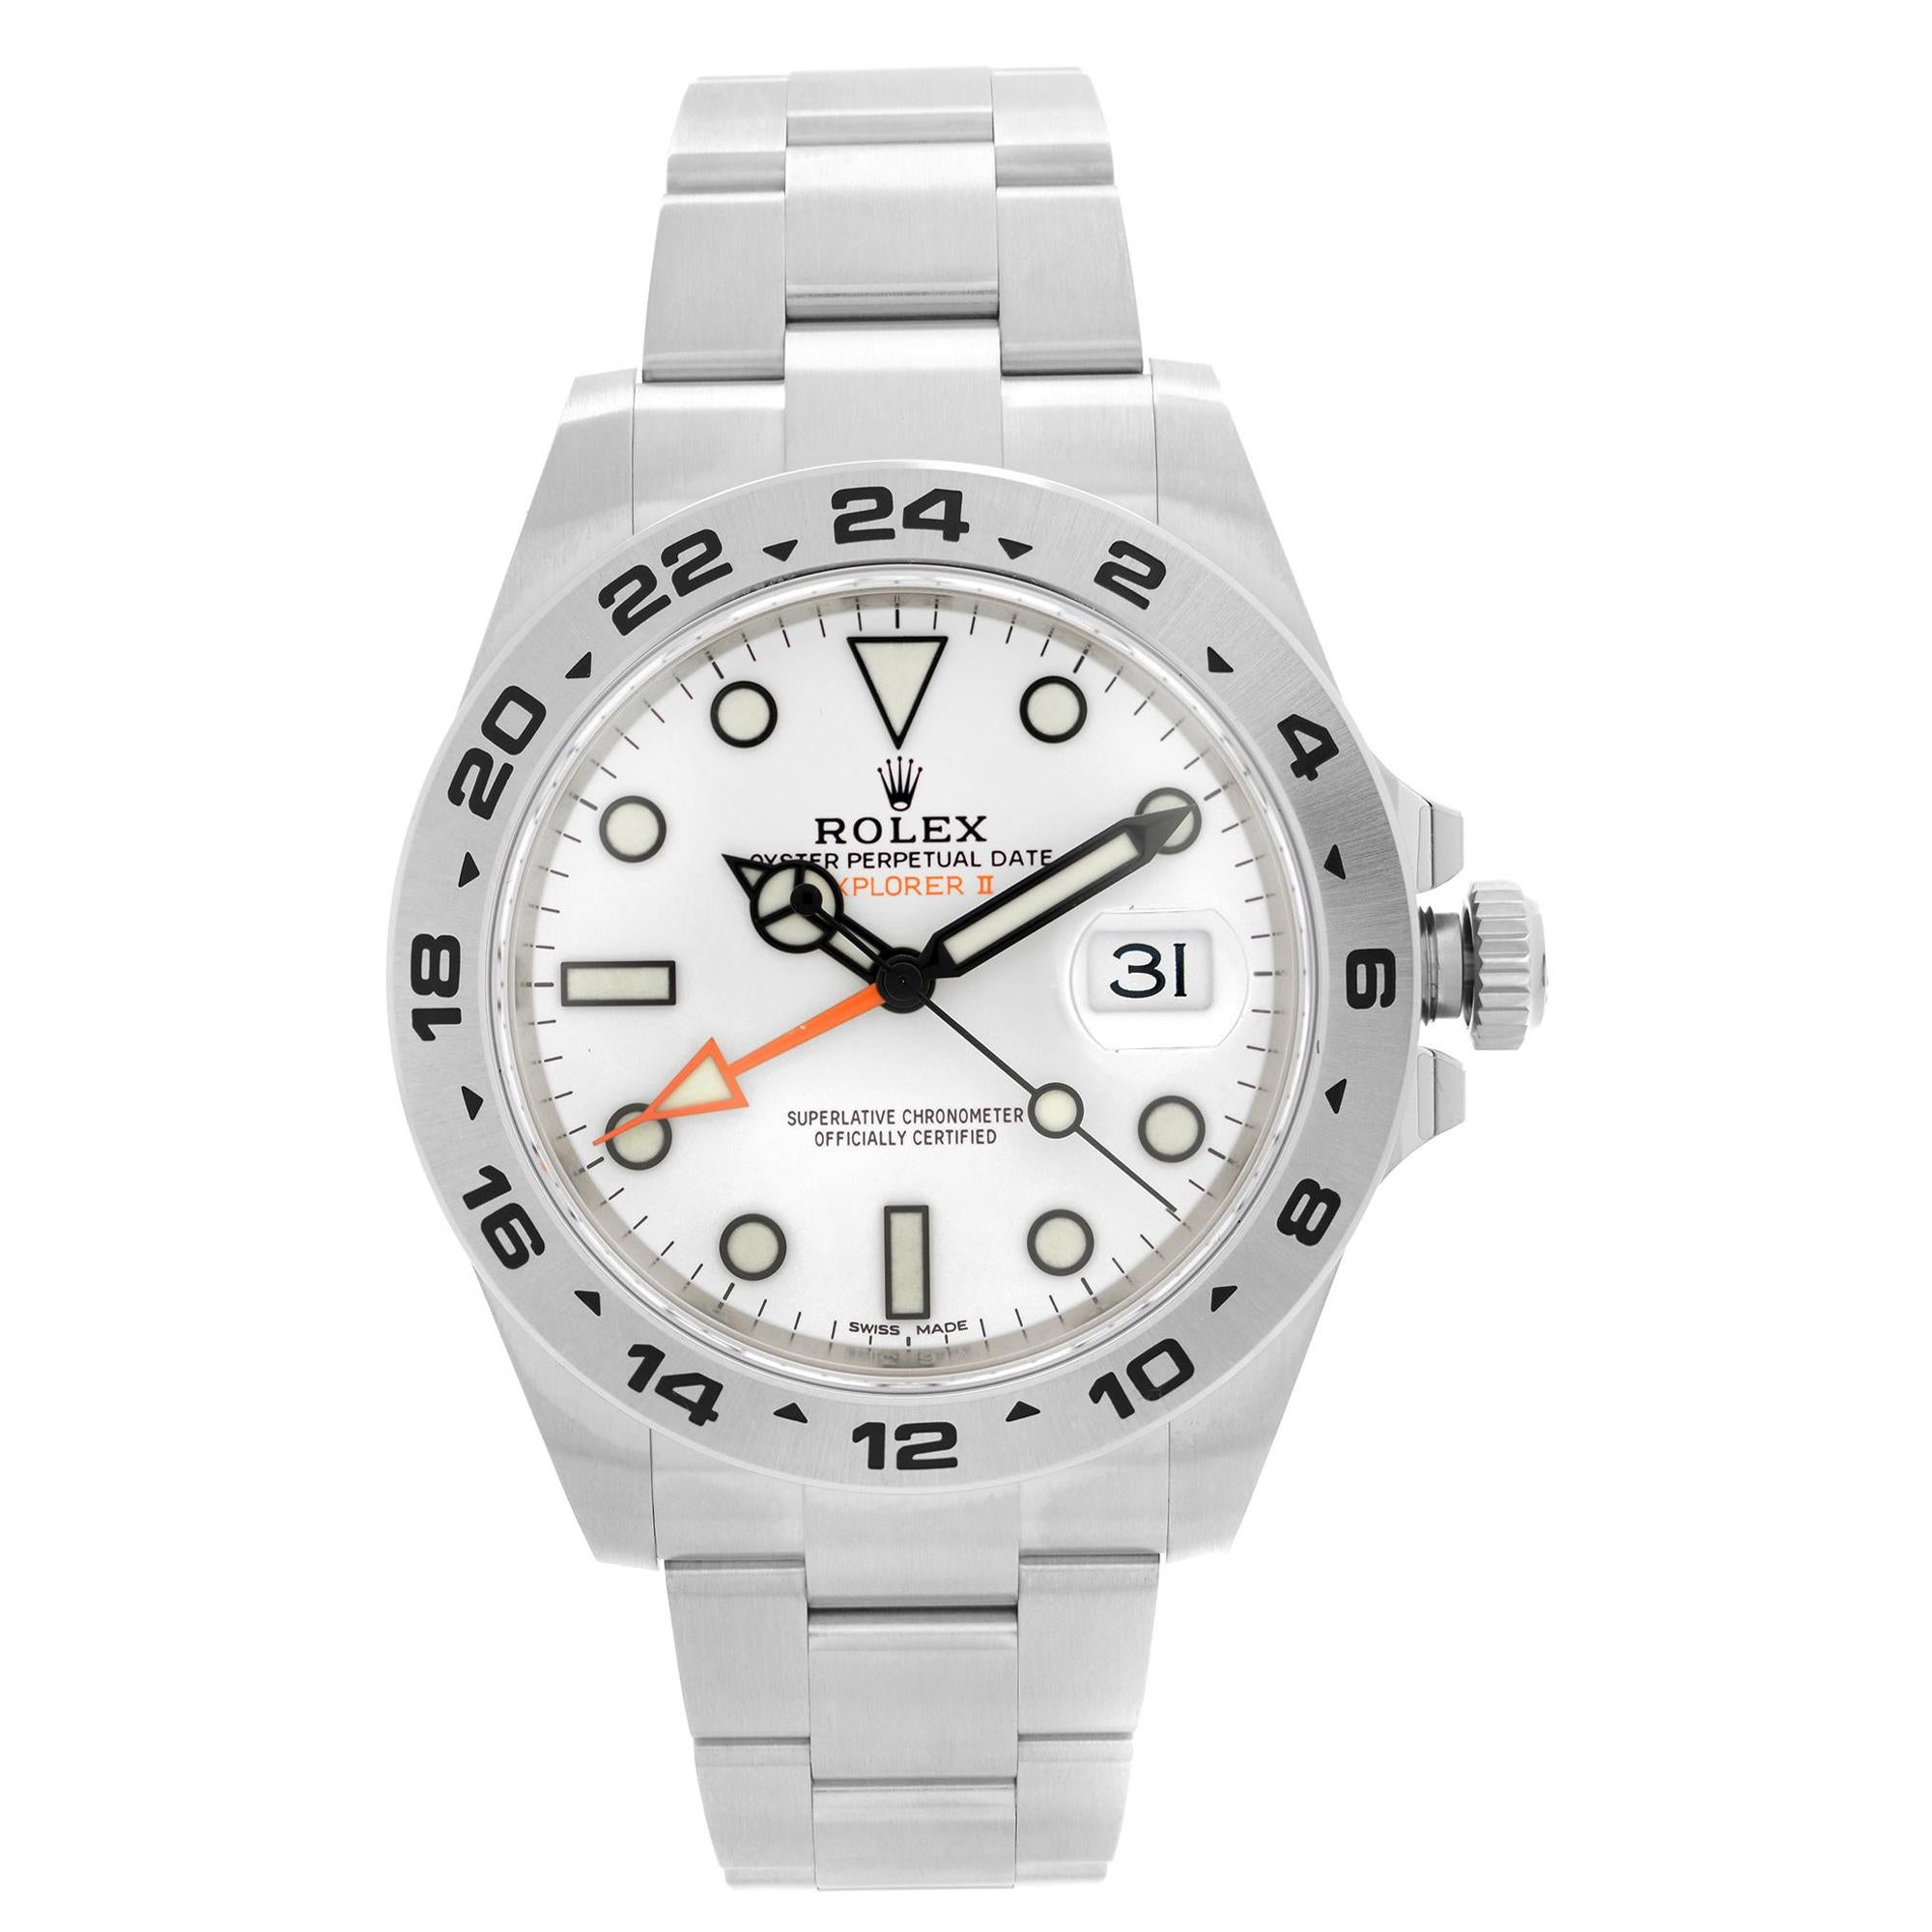 Rolex Explorer II GMT Stainless Steel White Dial Automatic Men Watch 216570 For Sale